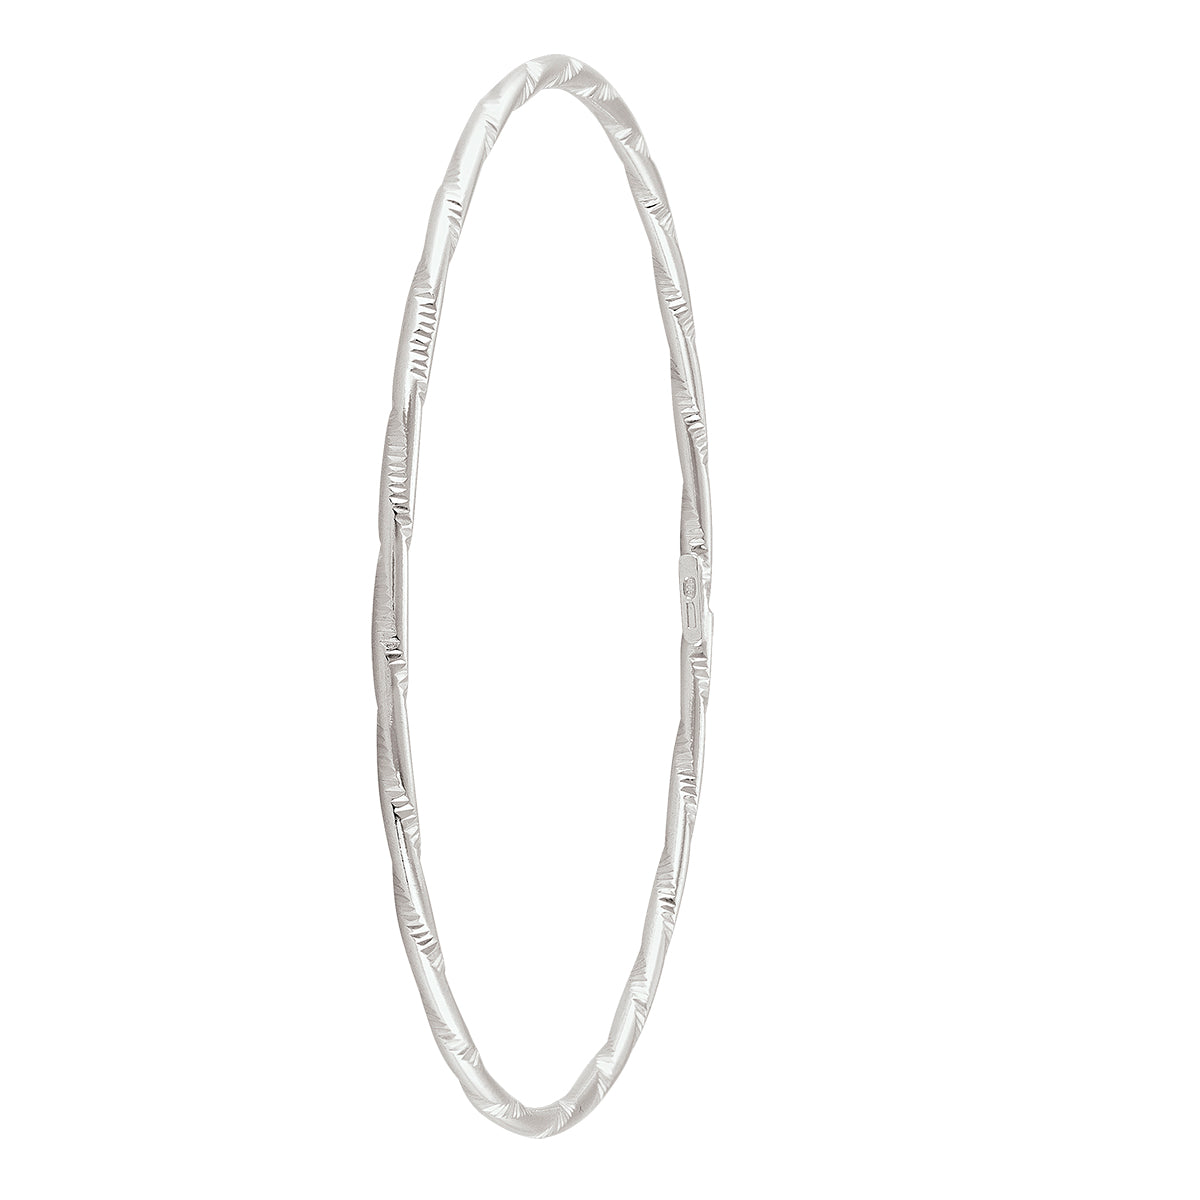 STERLING SILVER TWISTED SLIP ON BANGLE